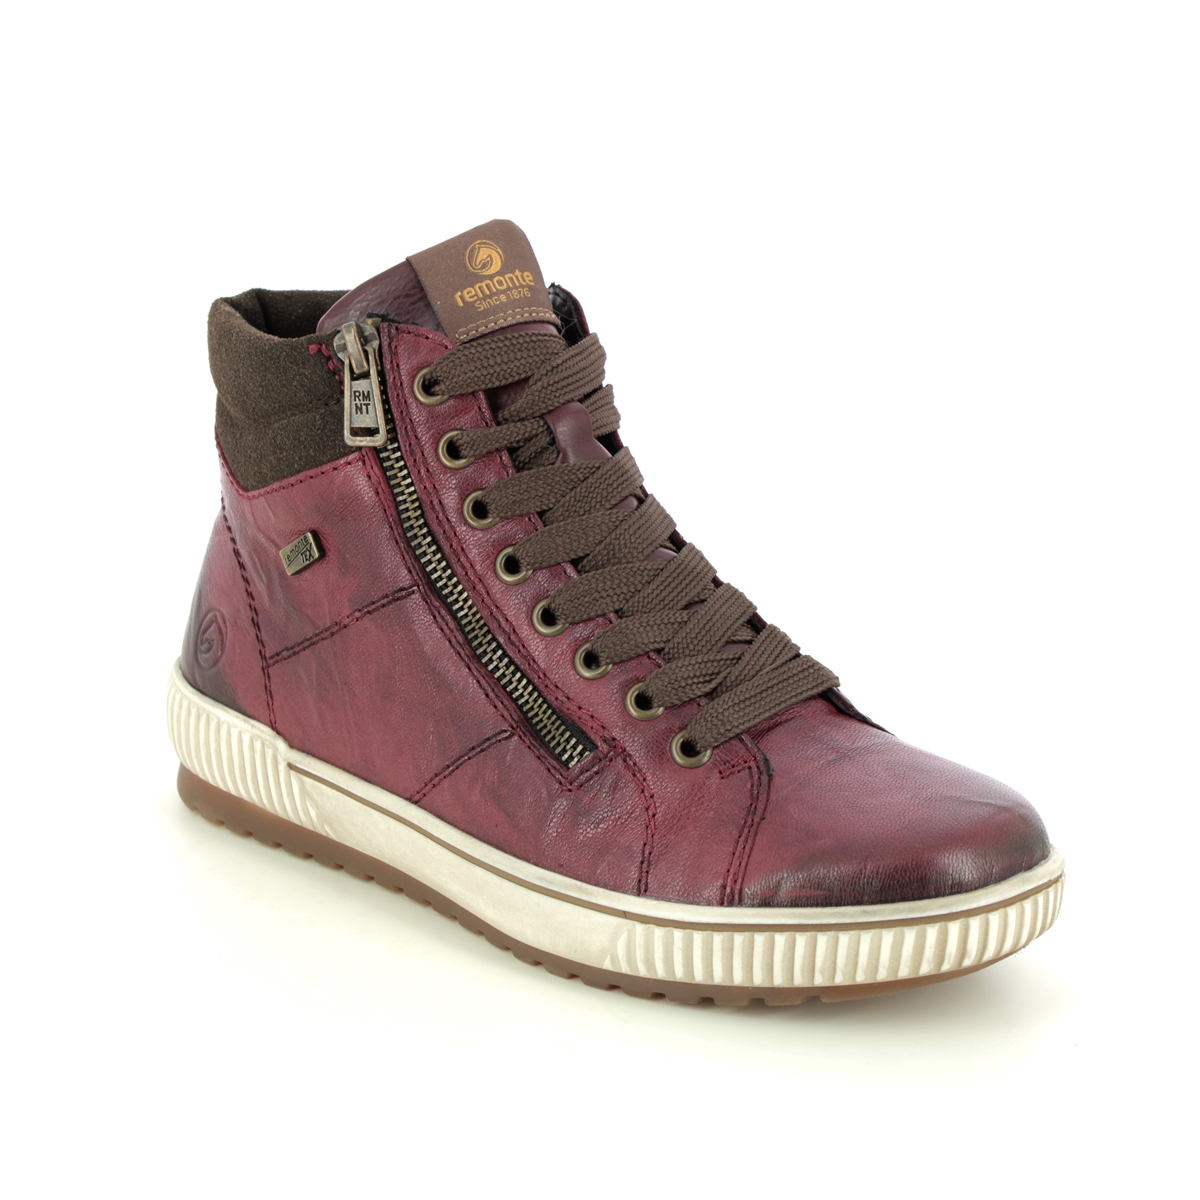 Remonte Tanaloto Tex Wine Leather Womens Hi Tops D0772-35 In Size 42 In Plain Wine Leather